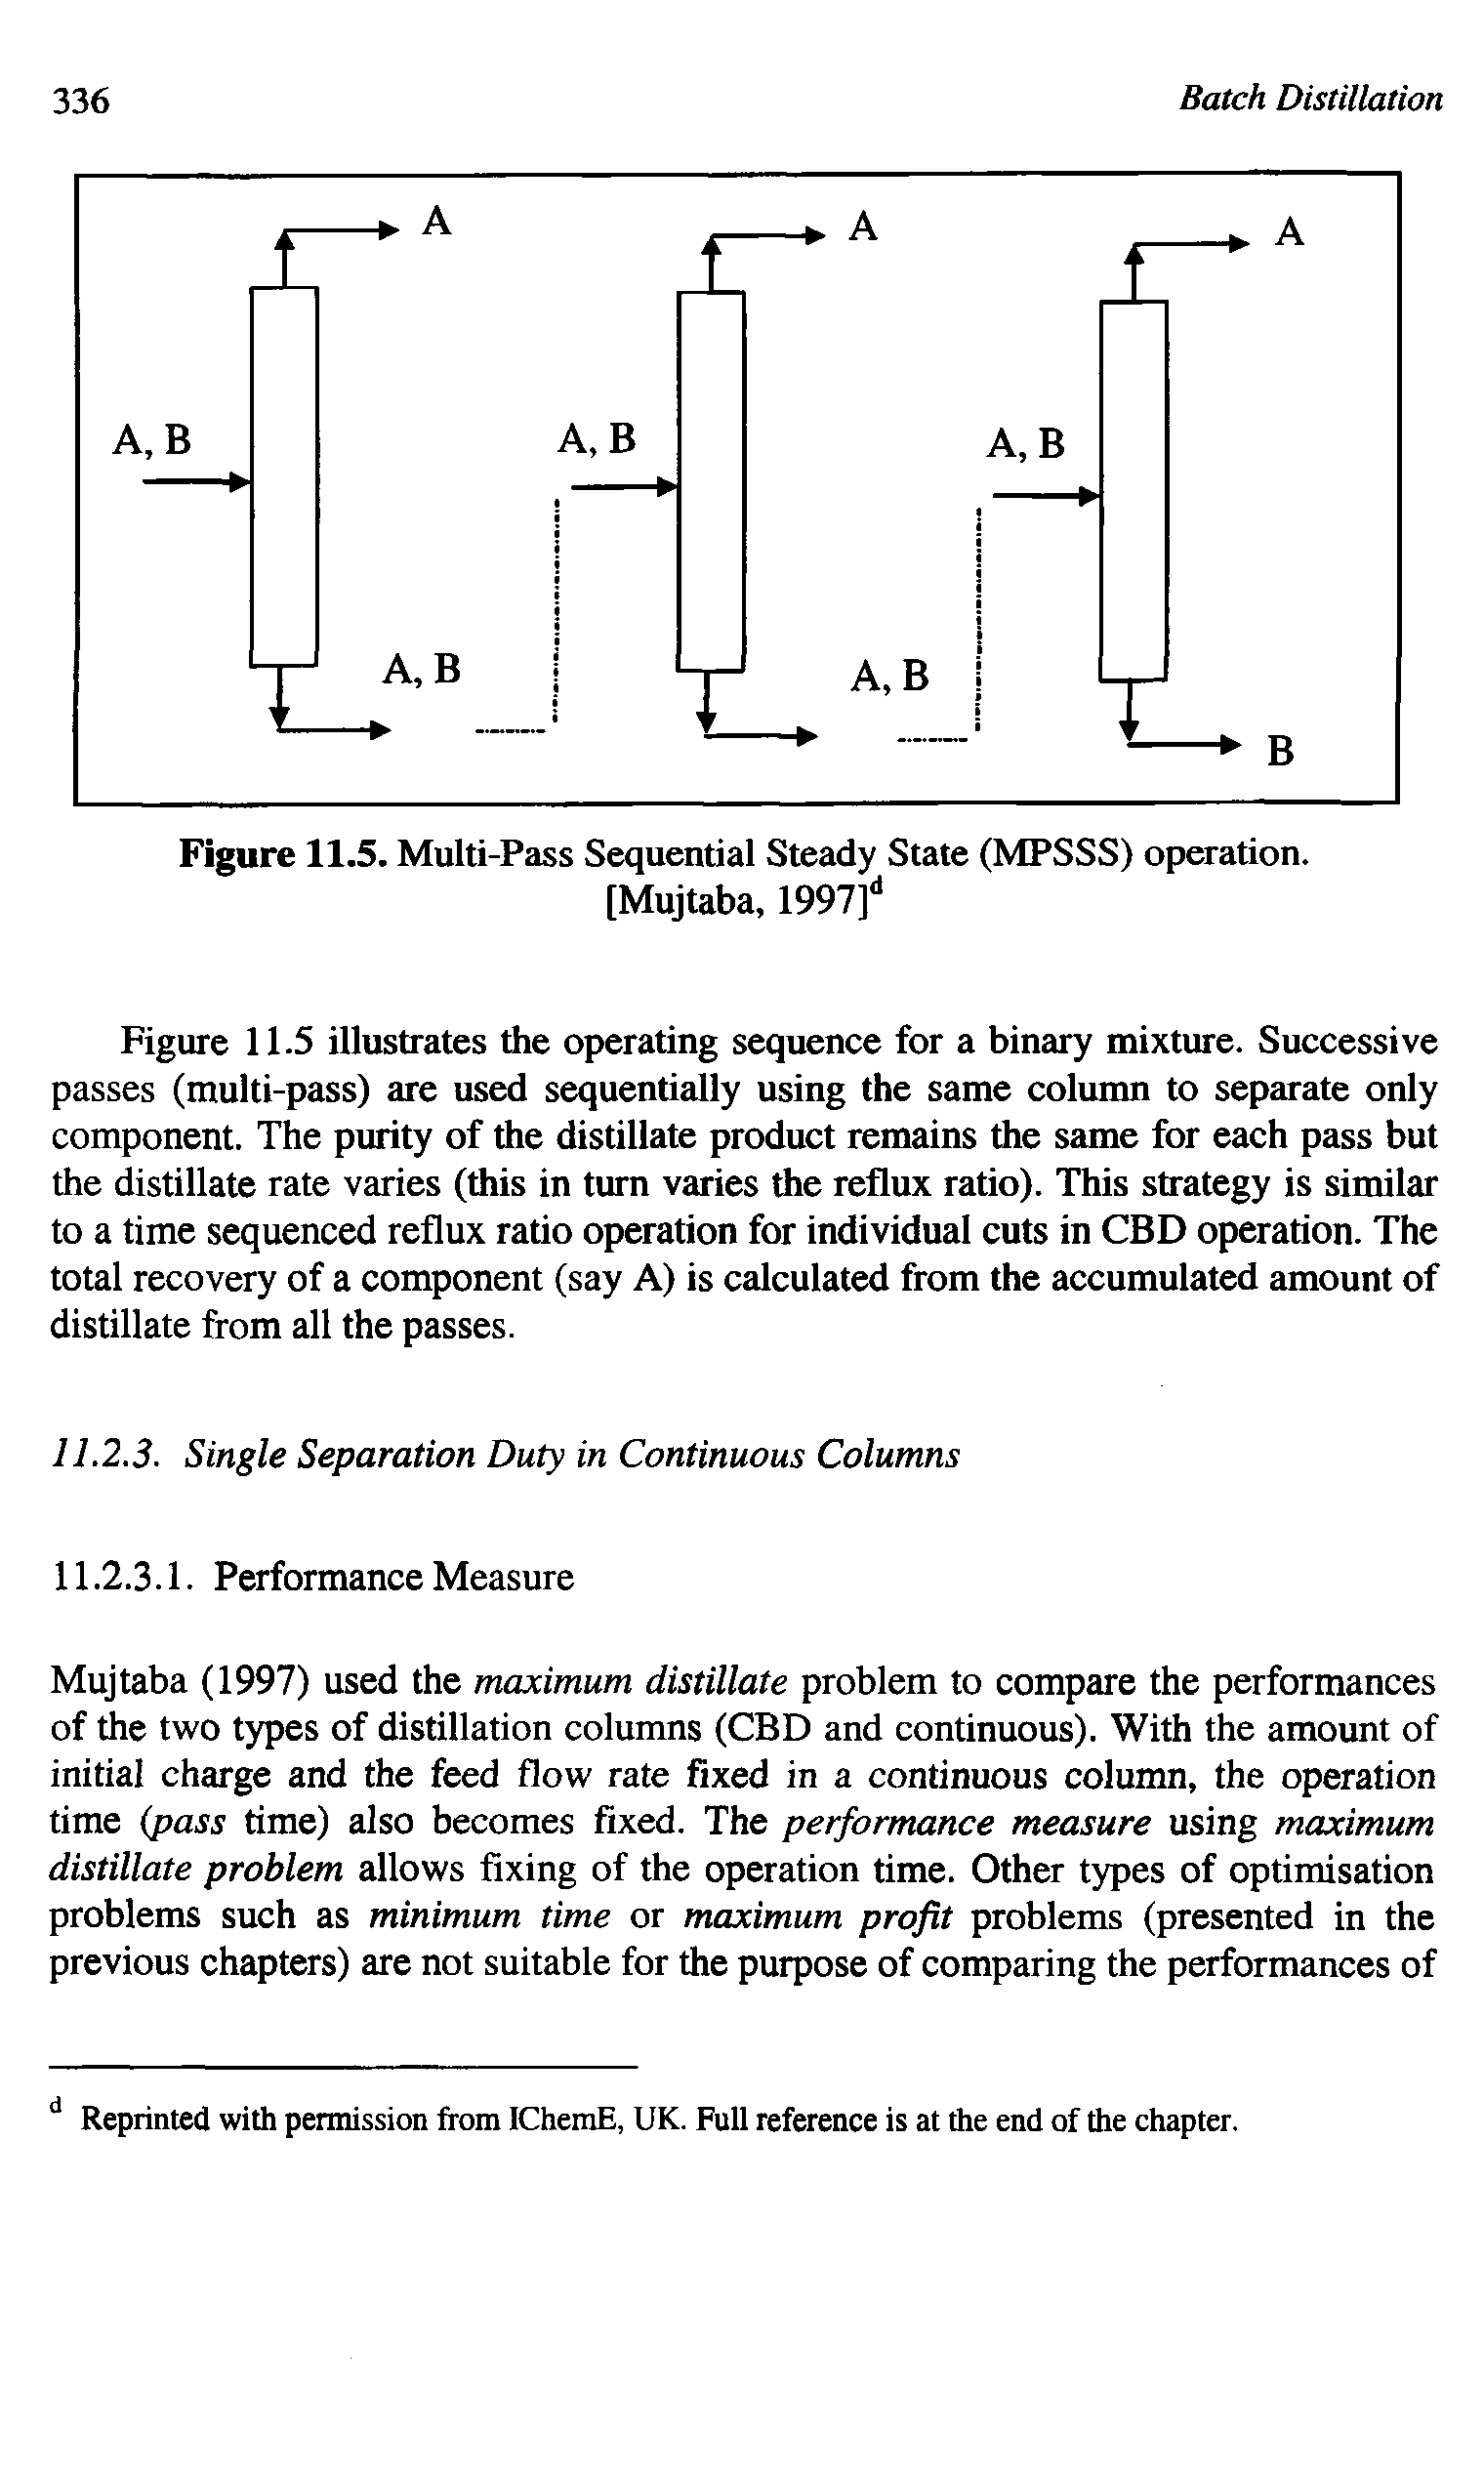 Figure 11.5. Multi-Pass Sequential Steady State (MPSSS) operation. [Mujtaba, 1997]d...